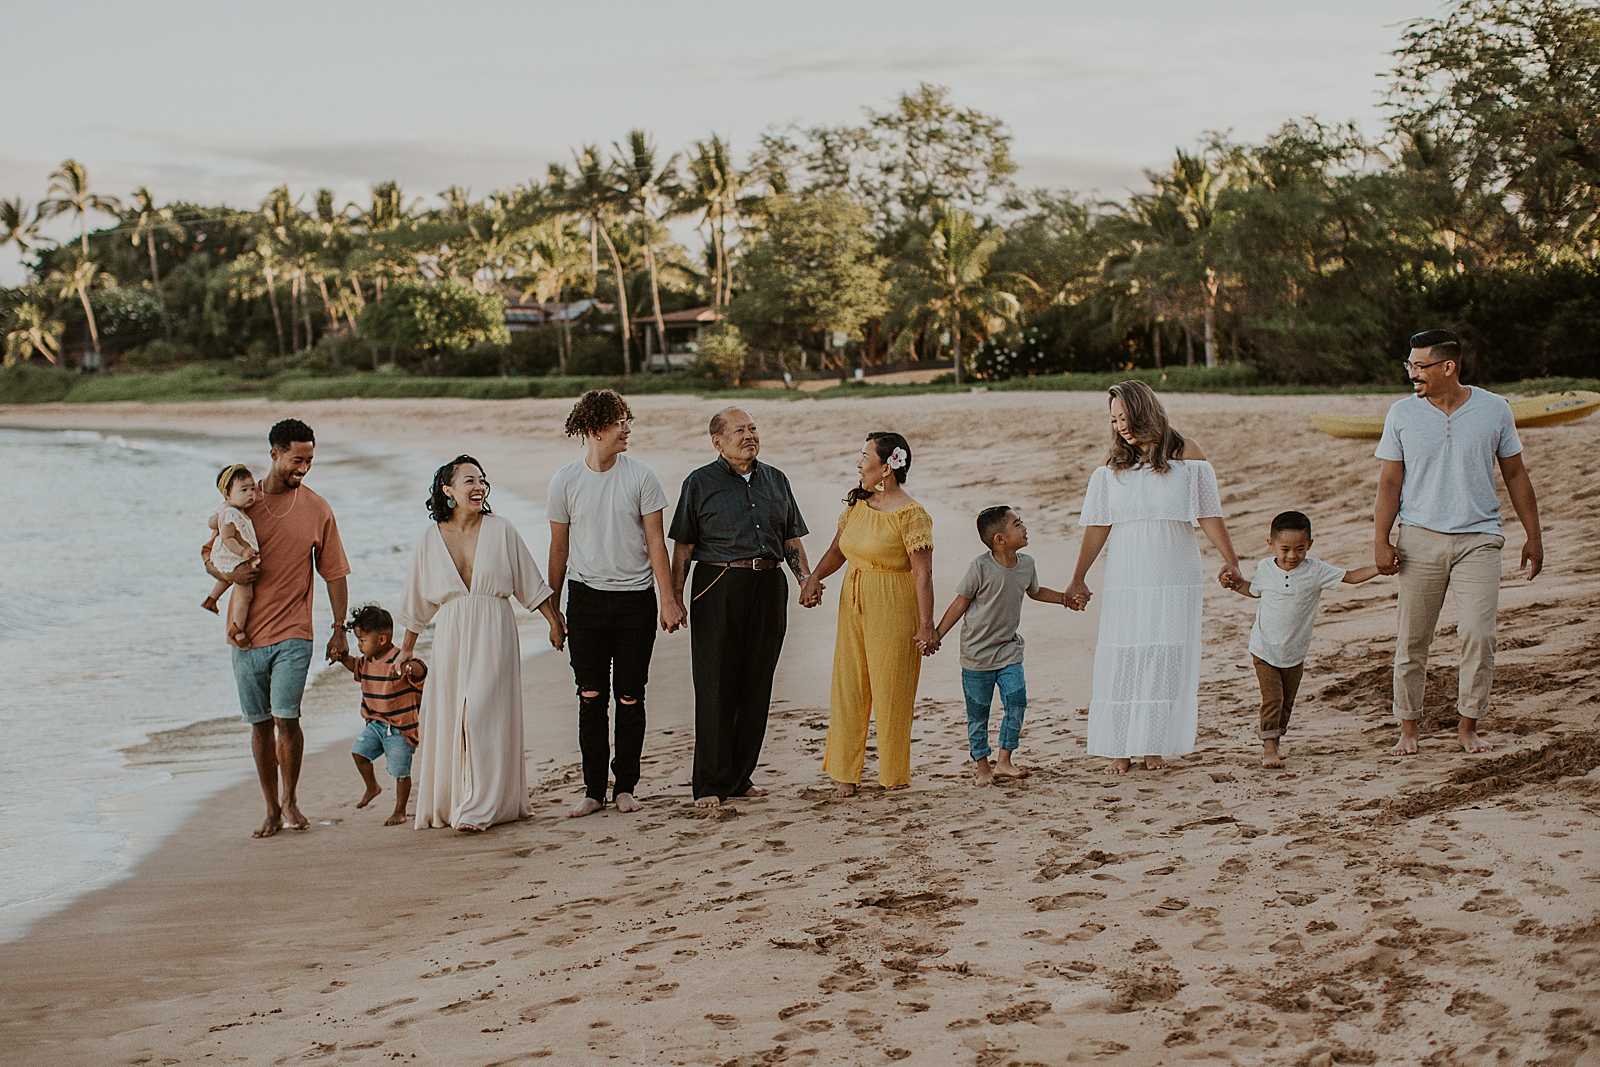 Entire multigenerational family standing holding hands on the beach together